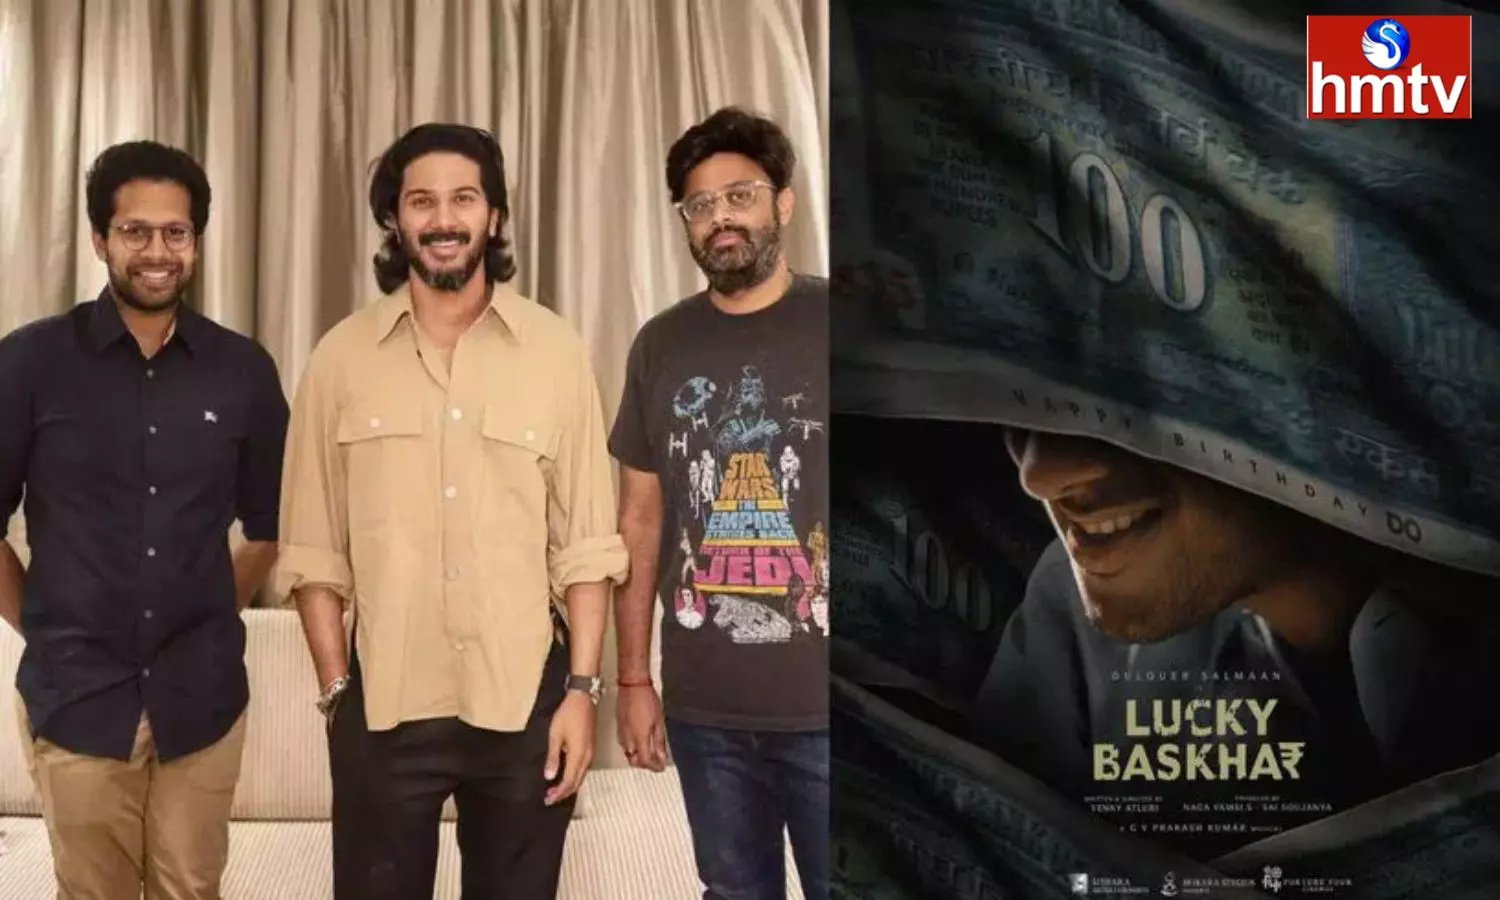 Venky Atluri’s Next Movie With Dulquer Salmaan is Titled Lucky Baskhar